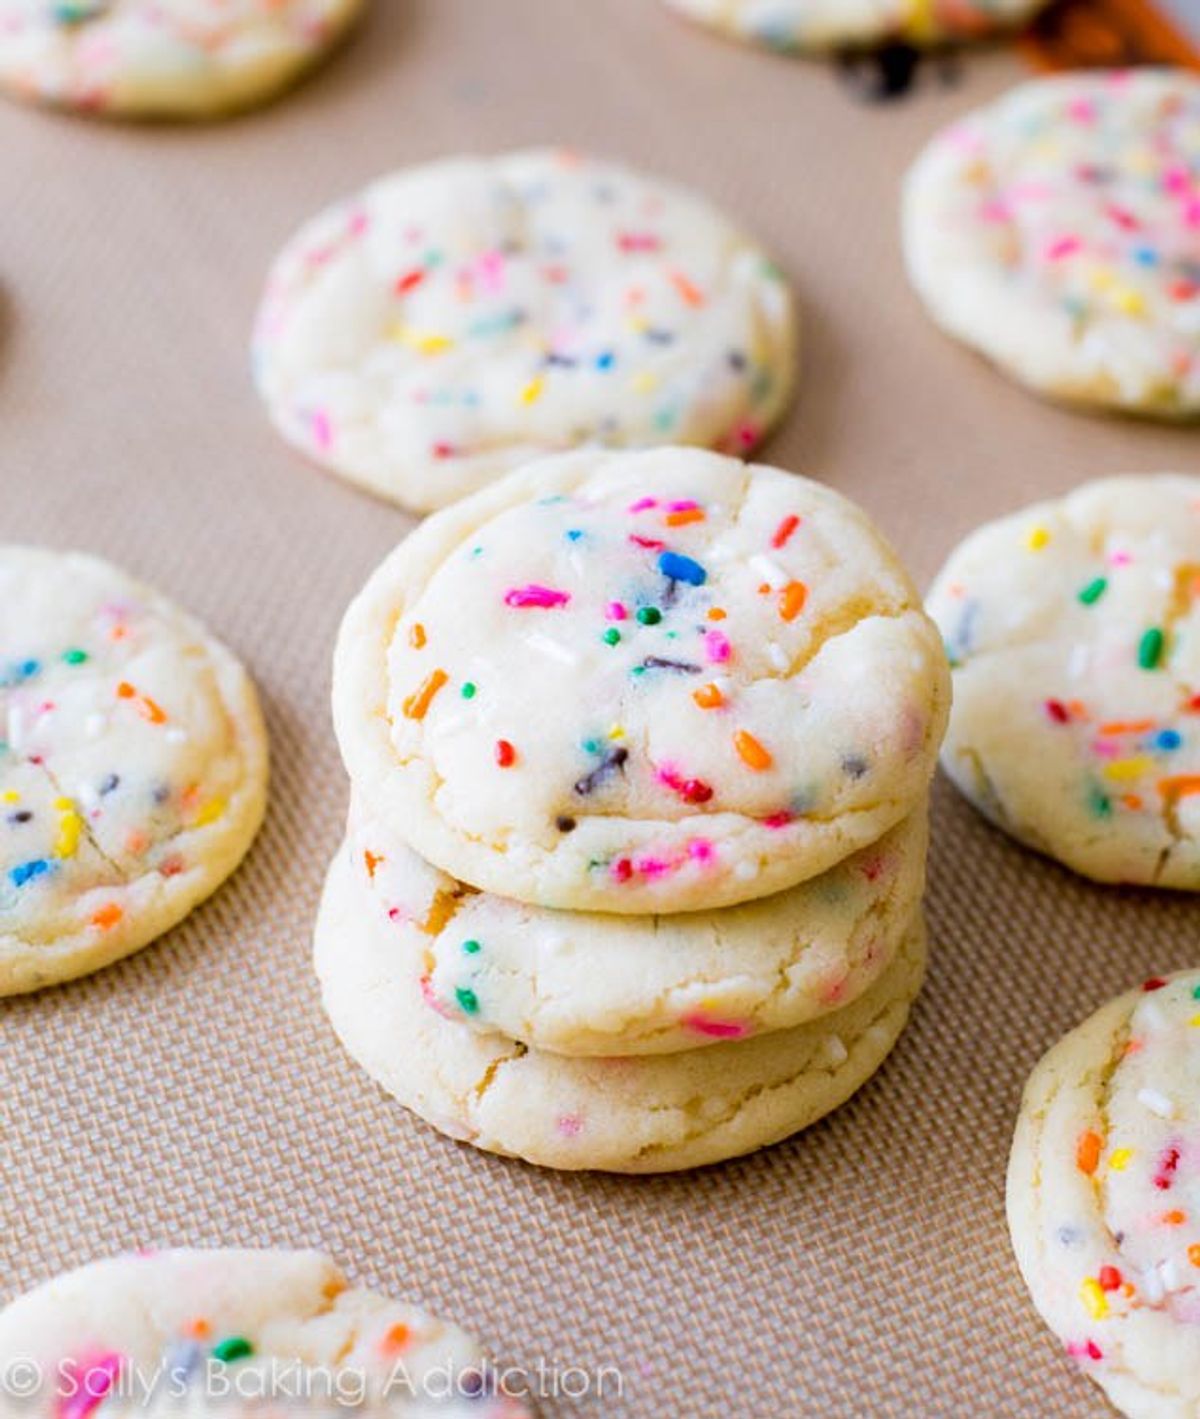 An Easy, Tasty Recipe for National Sugar Cookie Day!